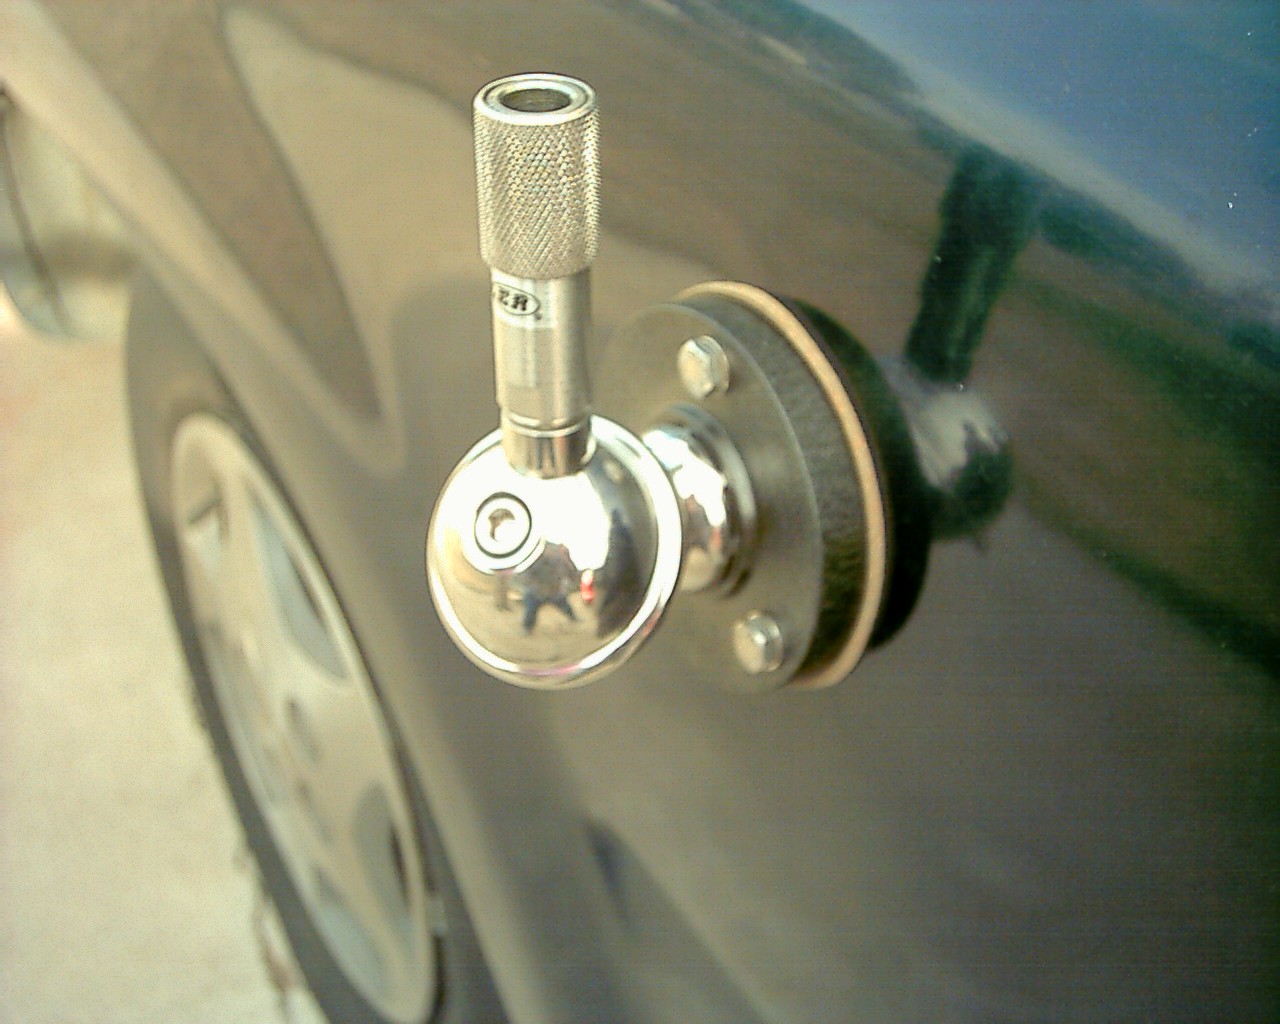 Another view of the Hustler ball mount.